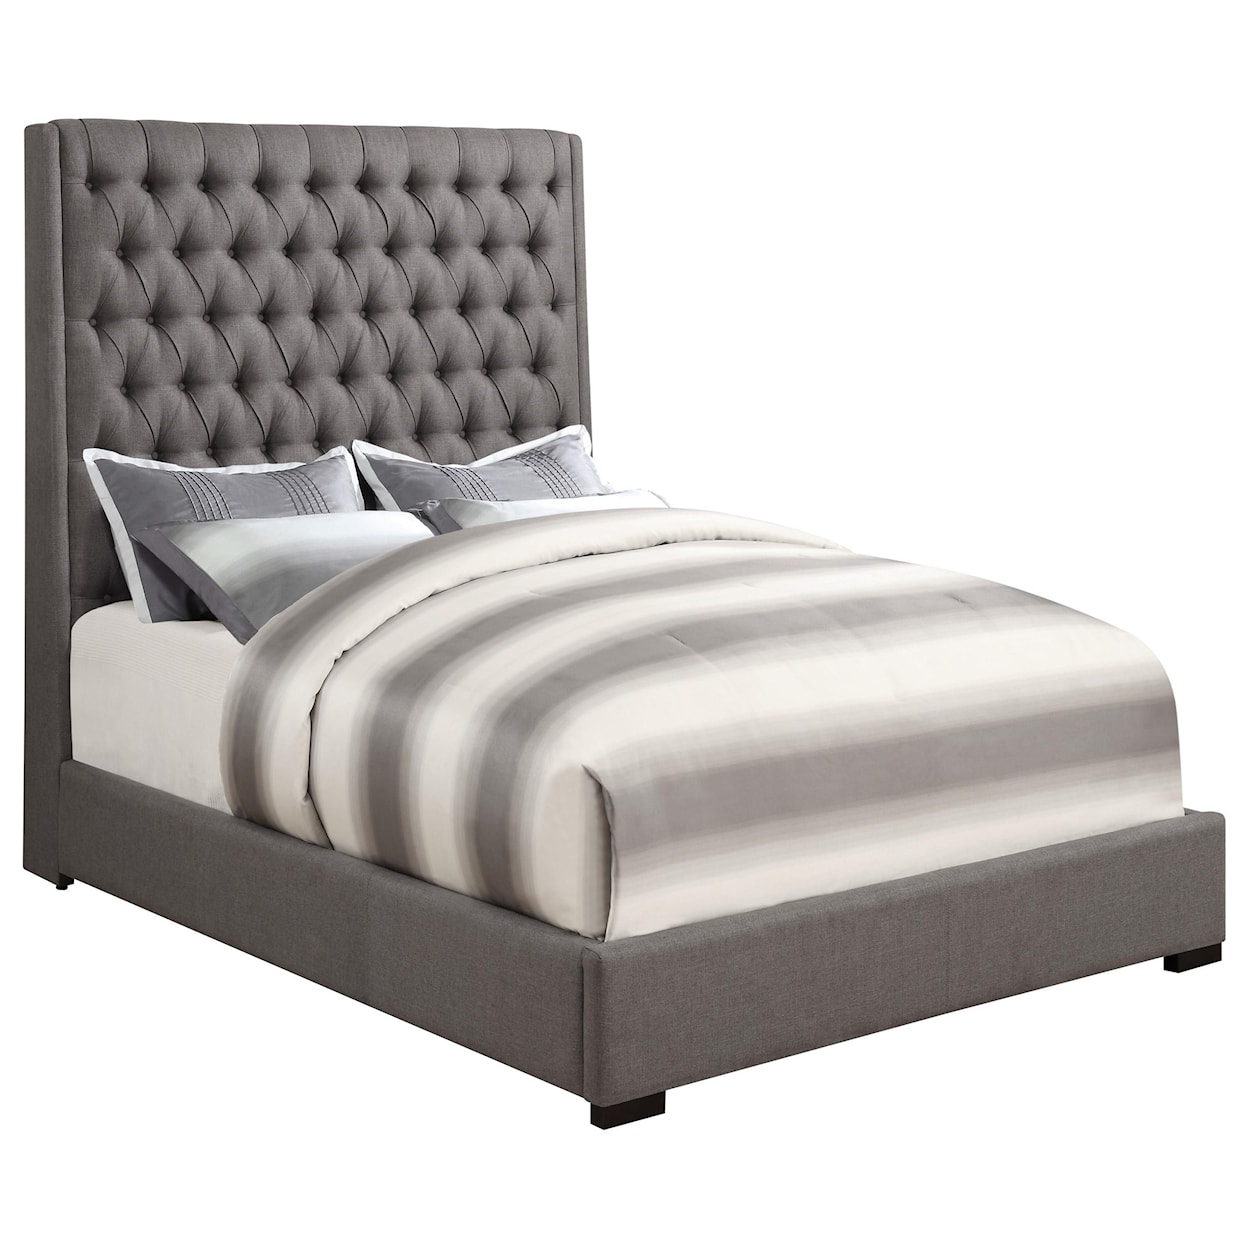 Coaster Upholstered Beds Queen Bed